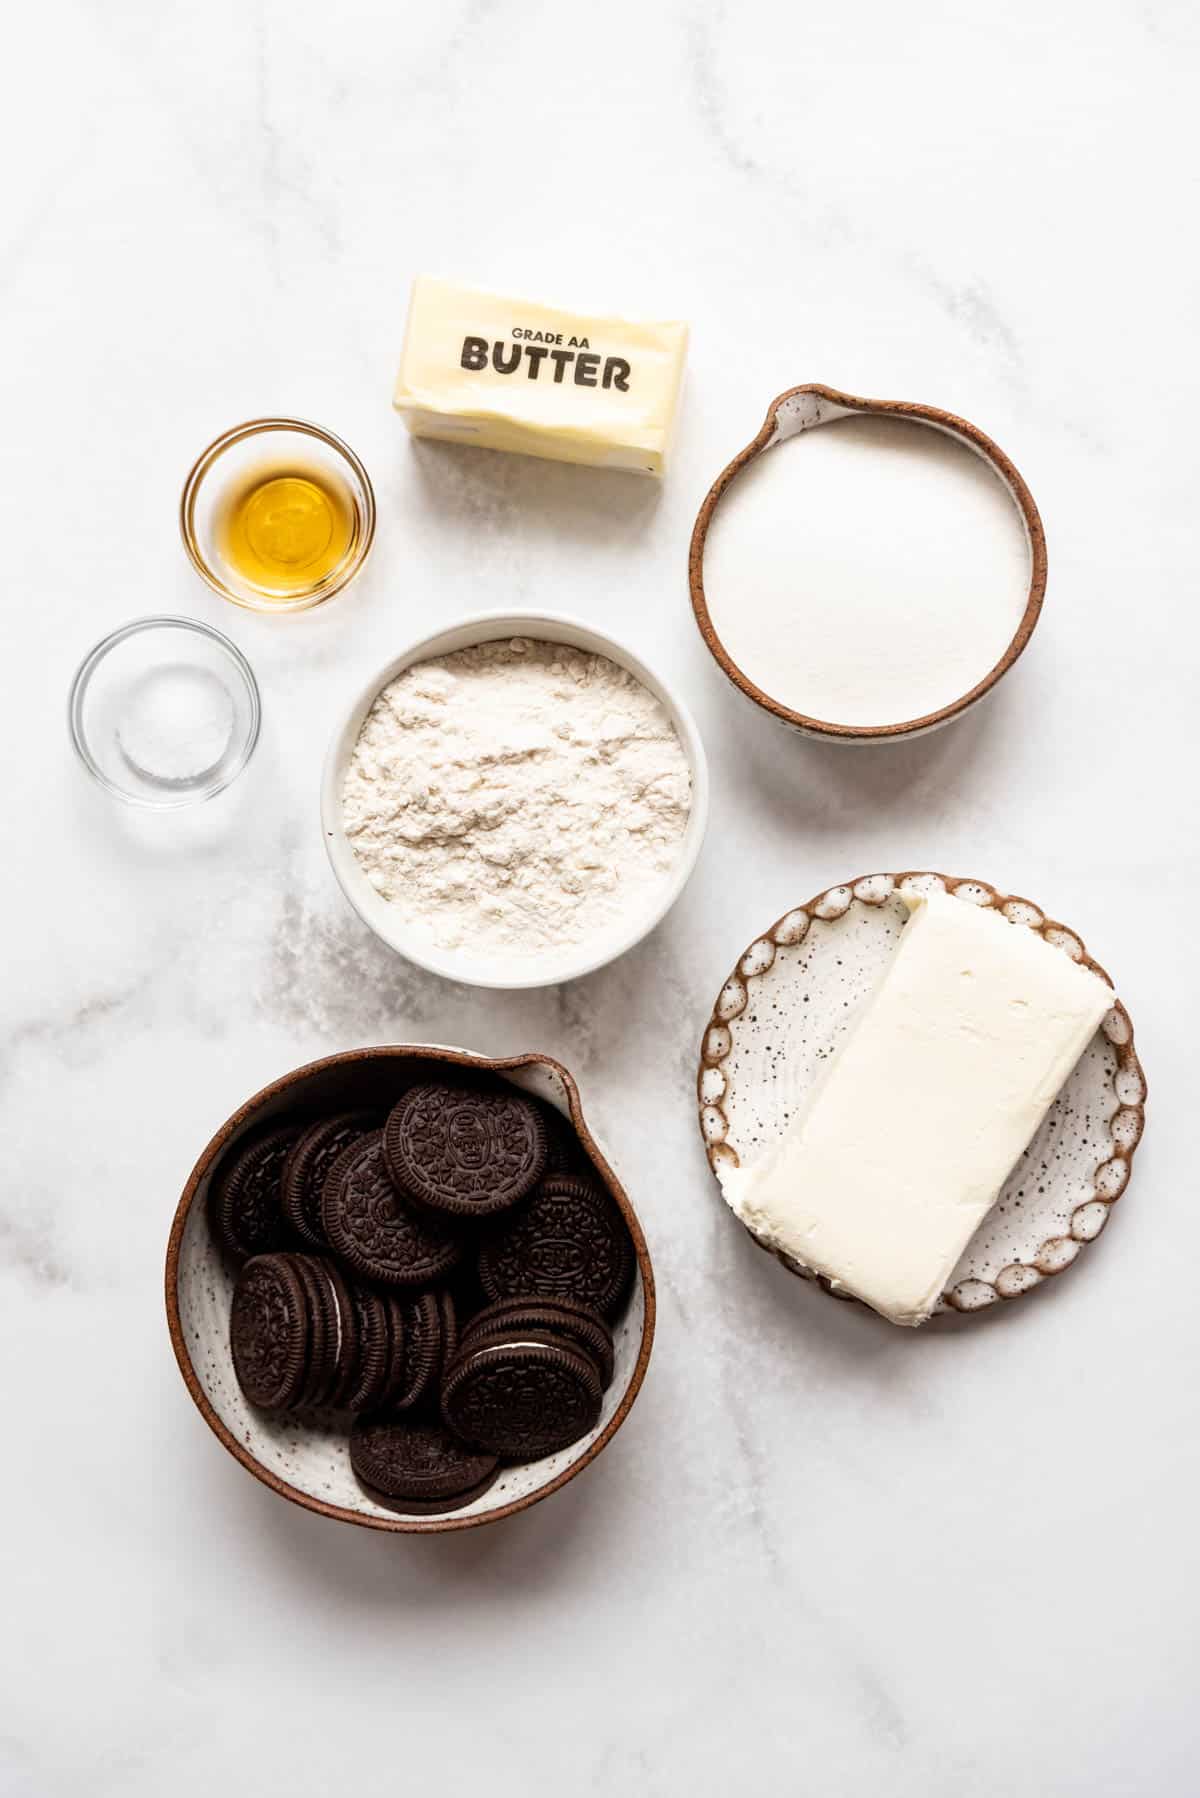 Ingredients for Oreo cheesecake cookies.